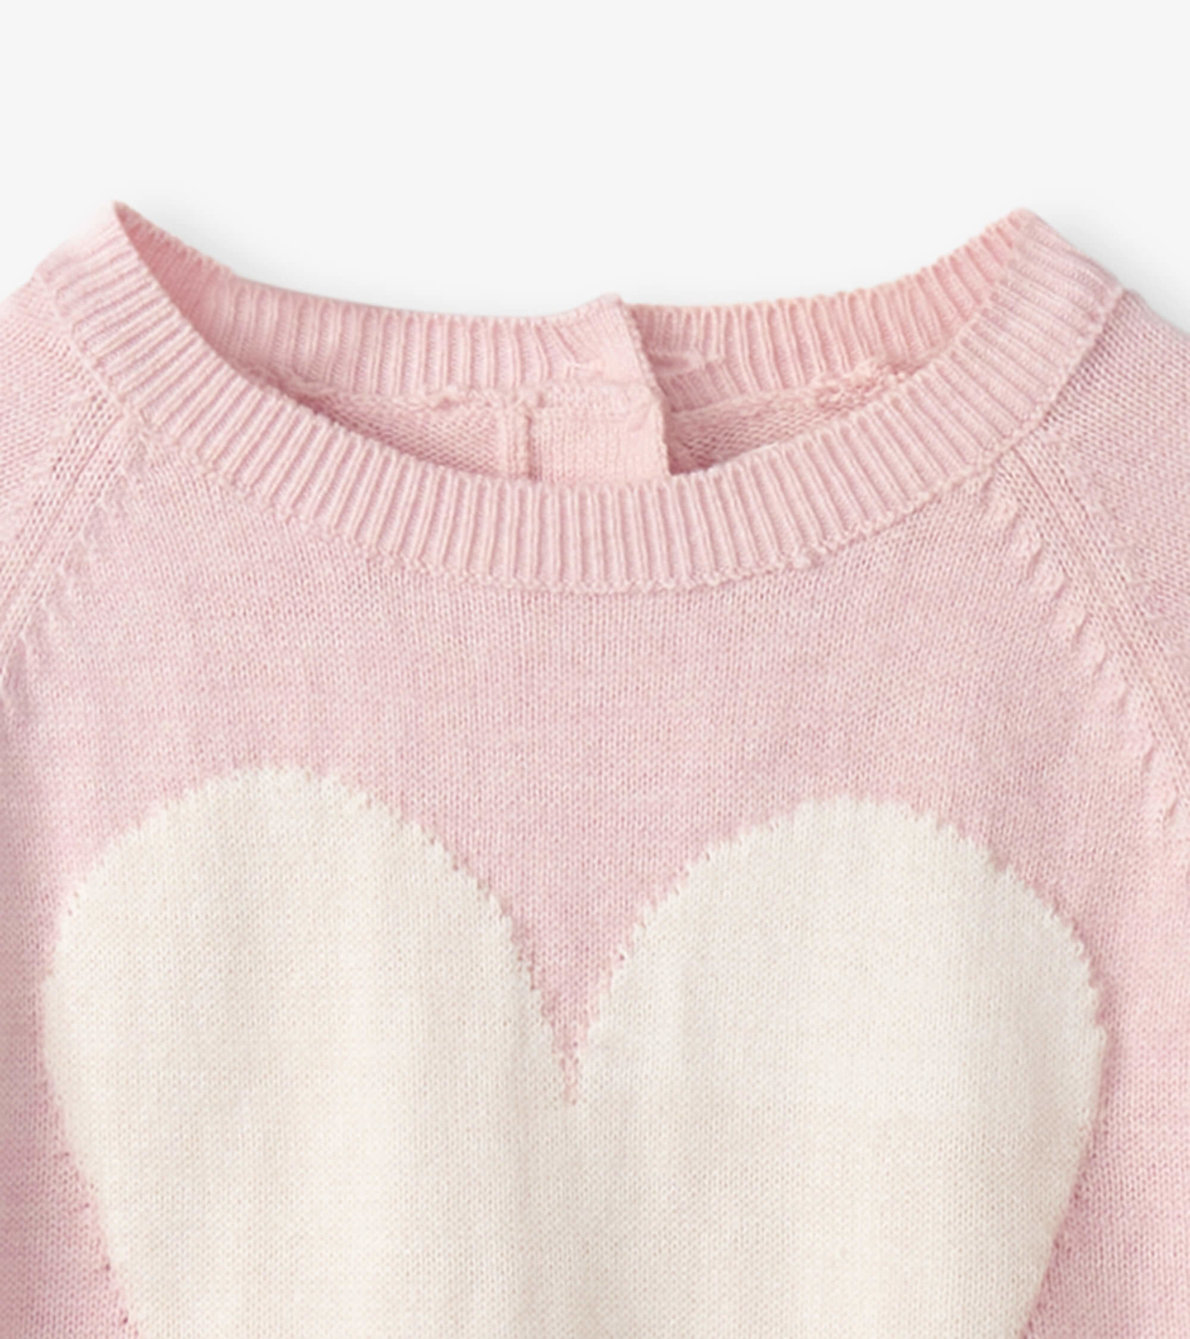 View larger image of Baby Big Heart Pullover Sweater